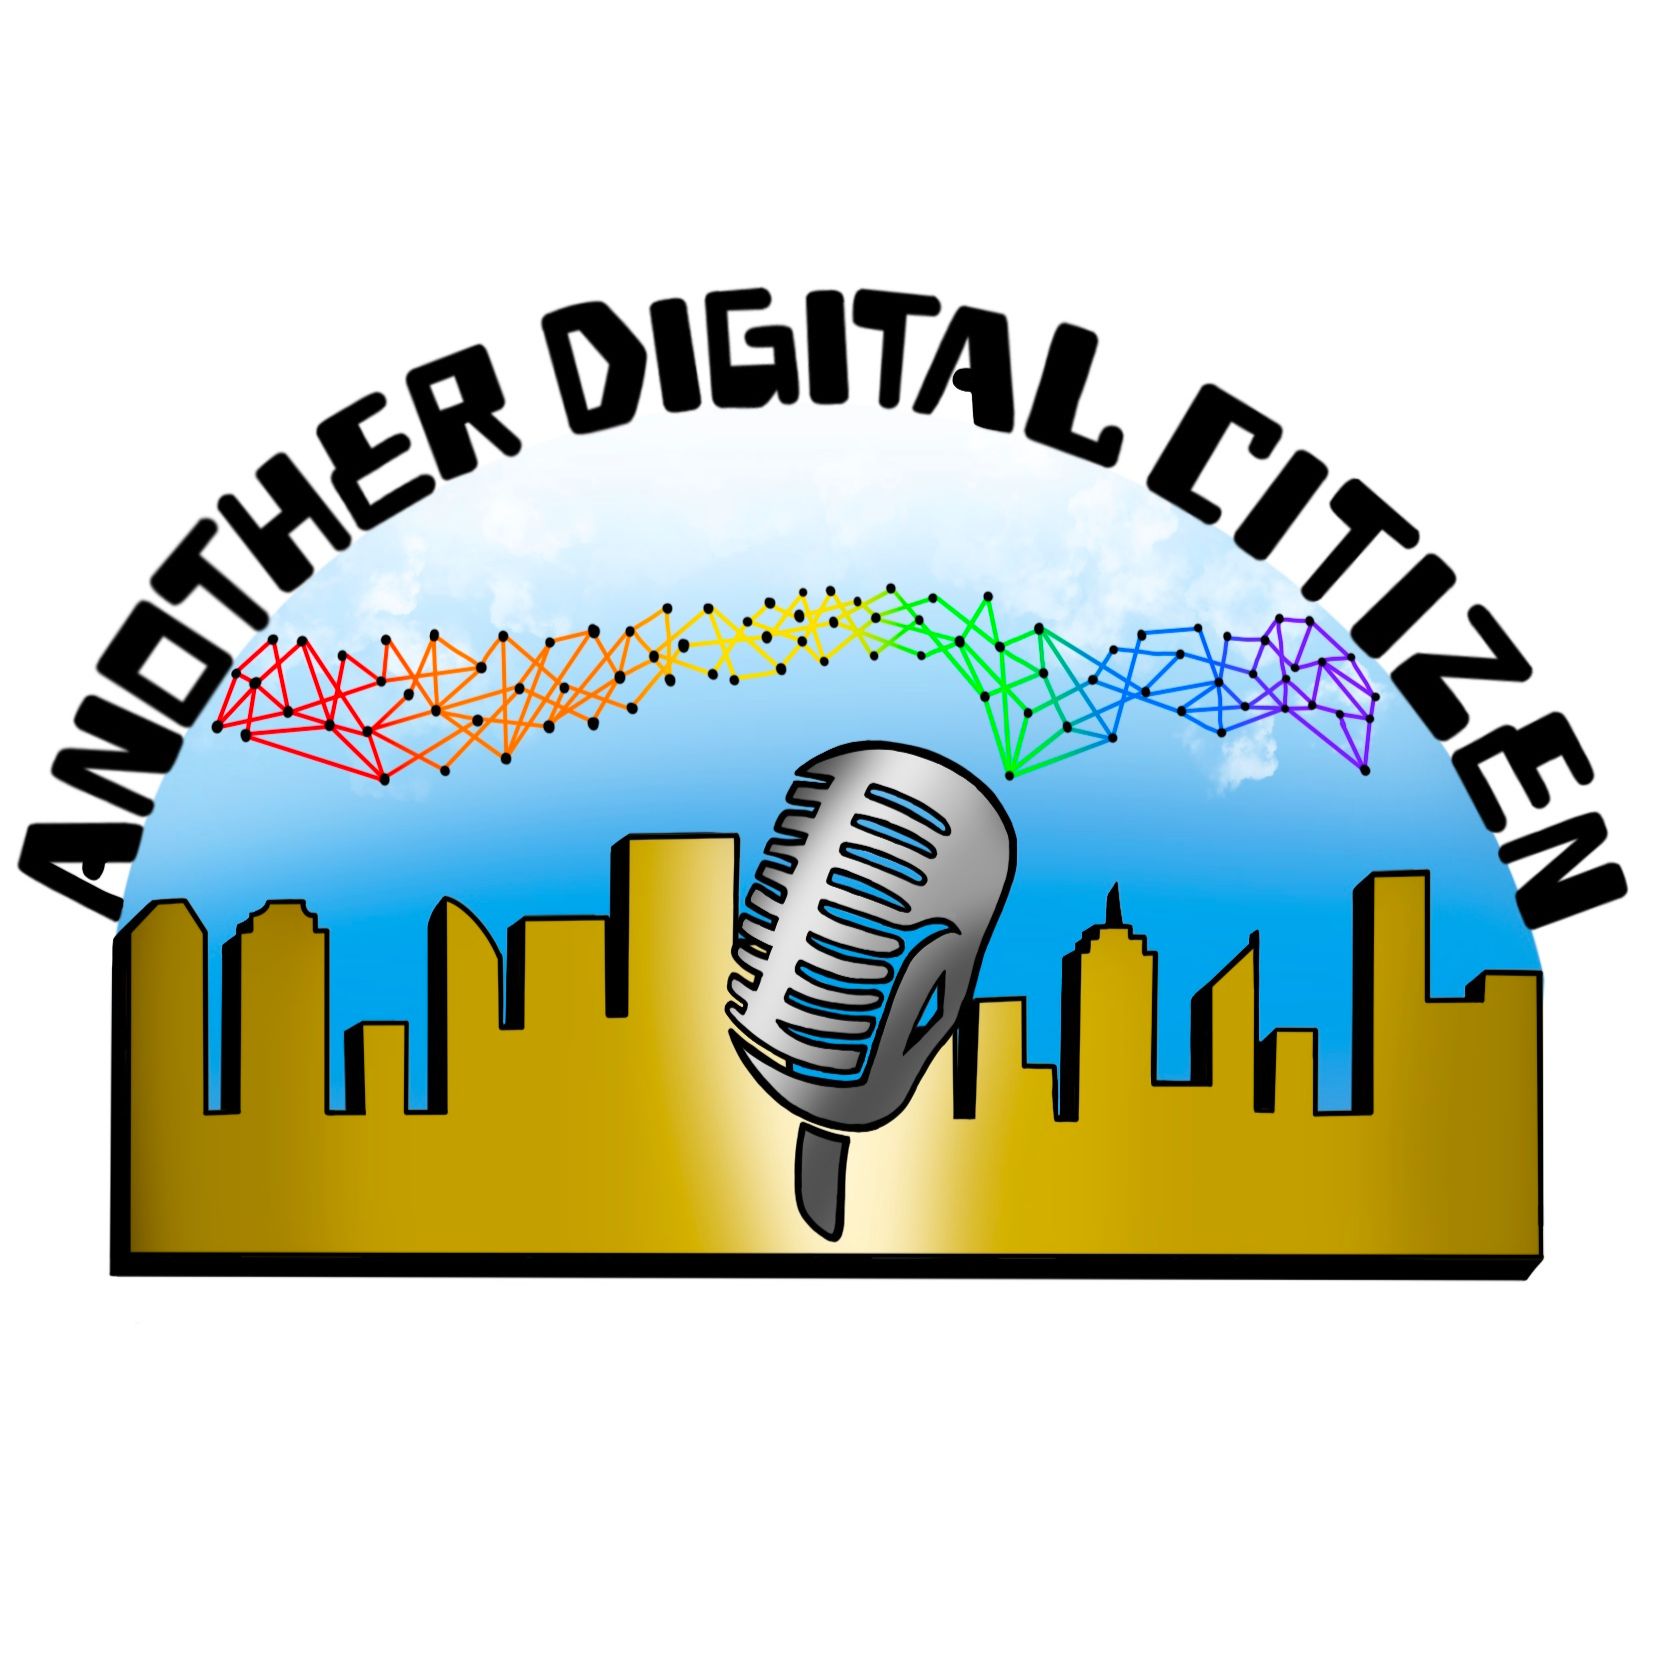 ANOTHER DIGITAL CITIZEN Episode 443- Bavarian Marques Brownlee Rages At Eurovision Security